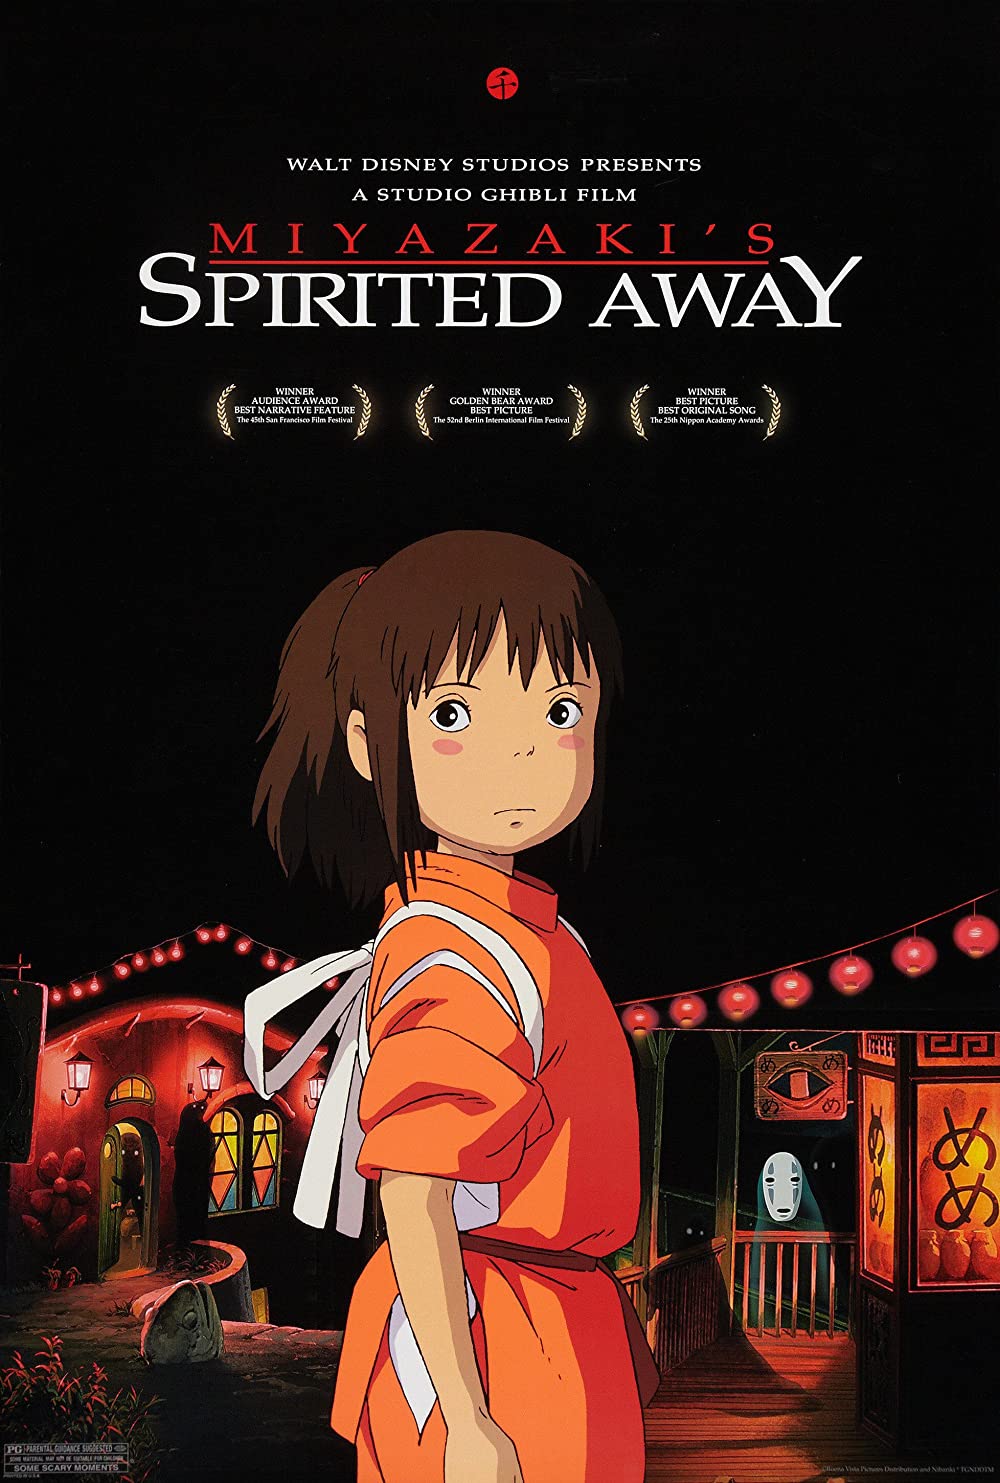 Some Ghibli movies to make your day better